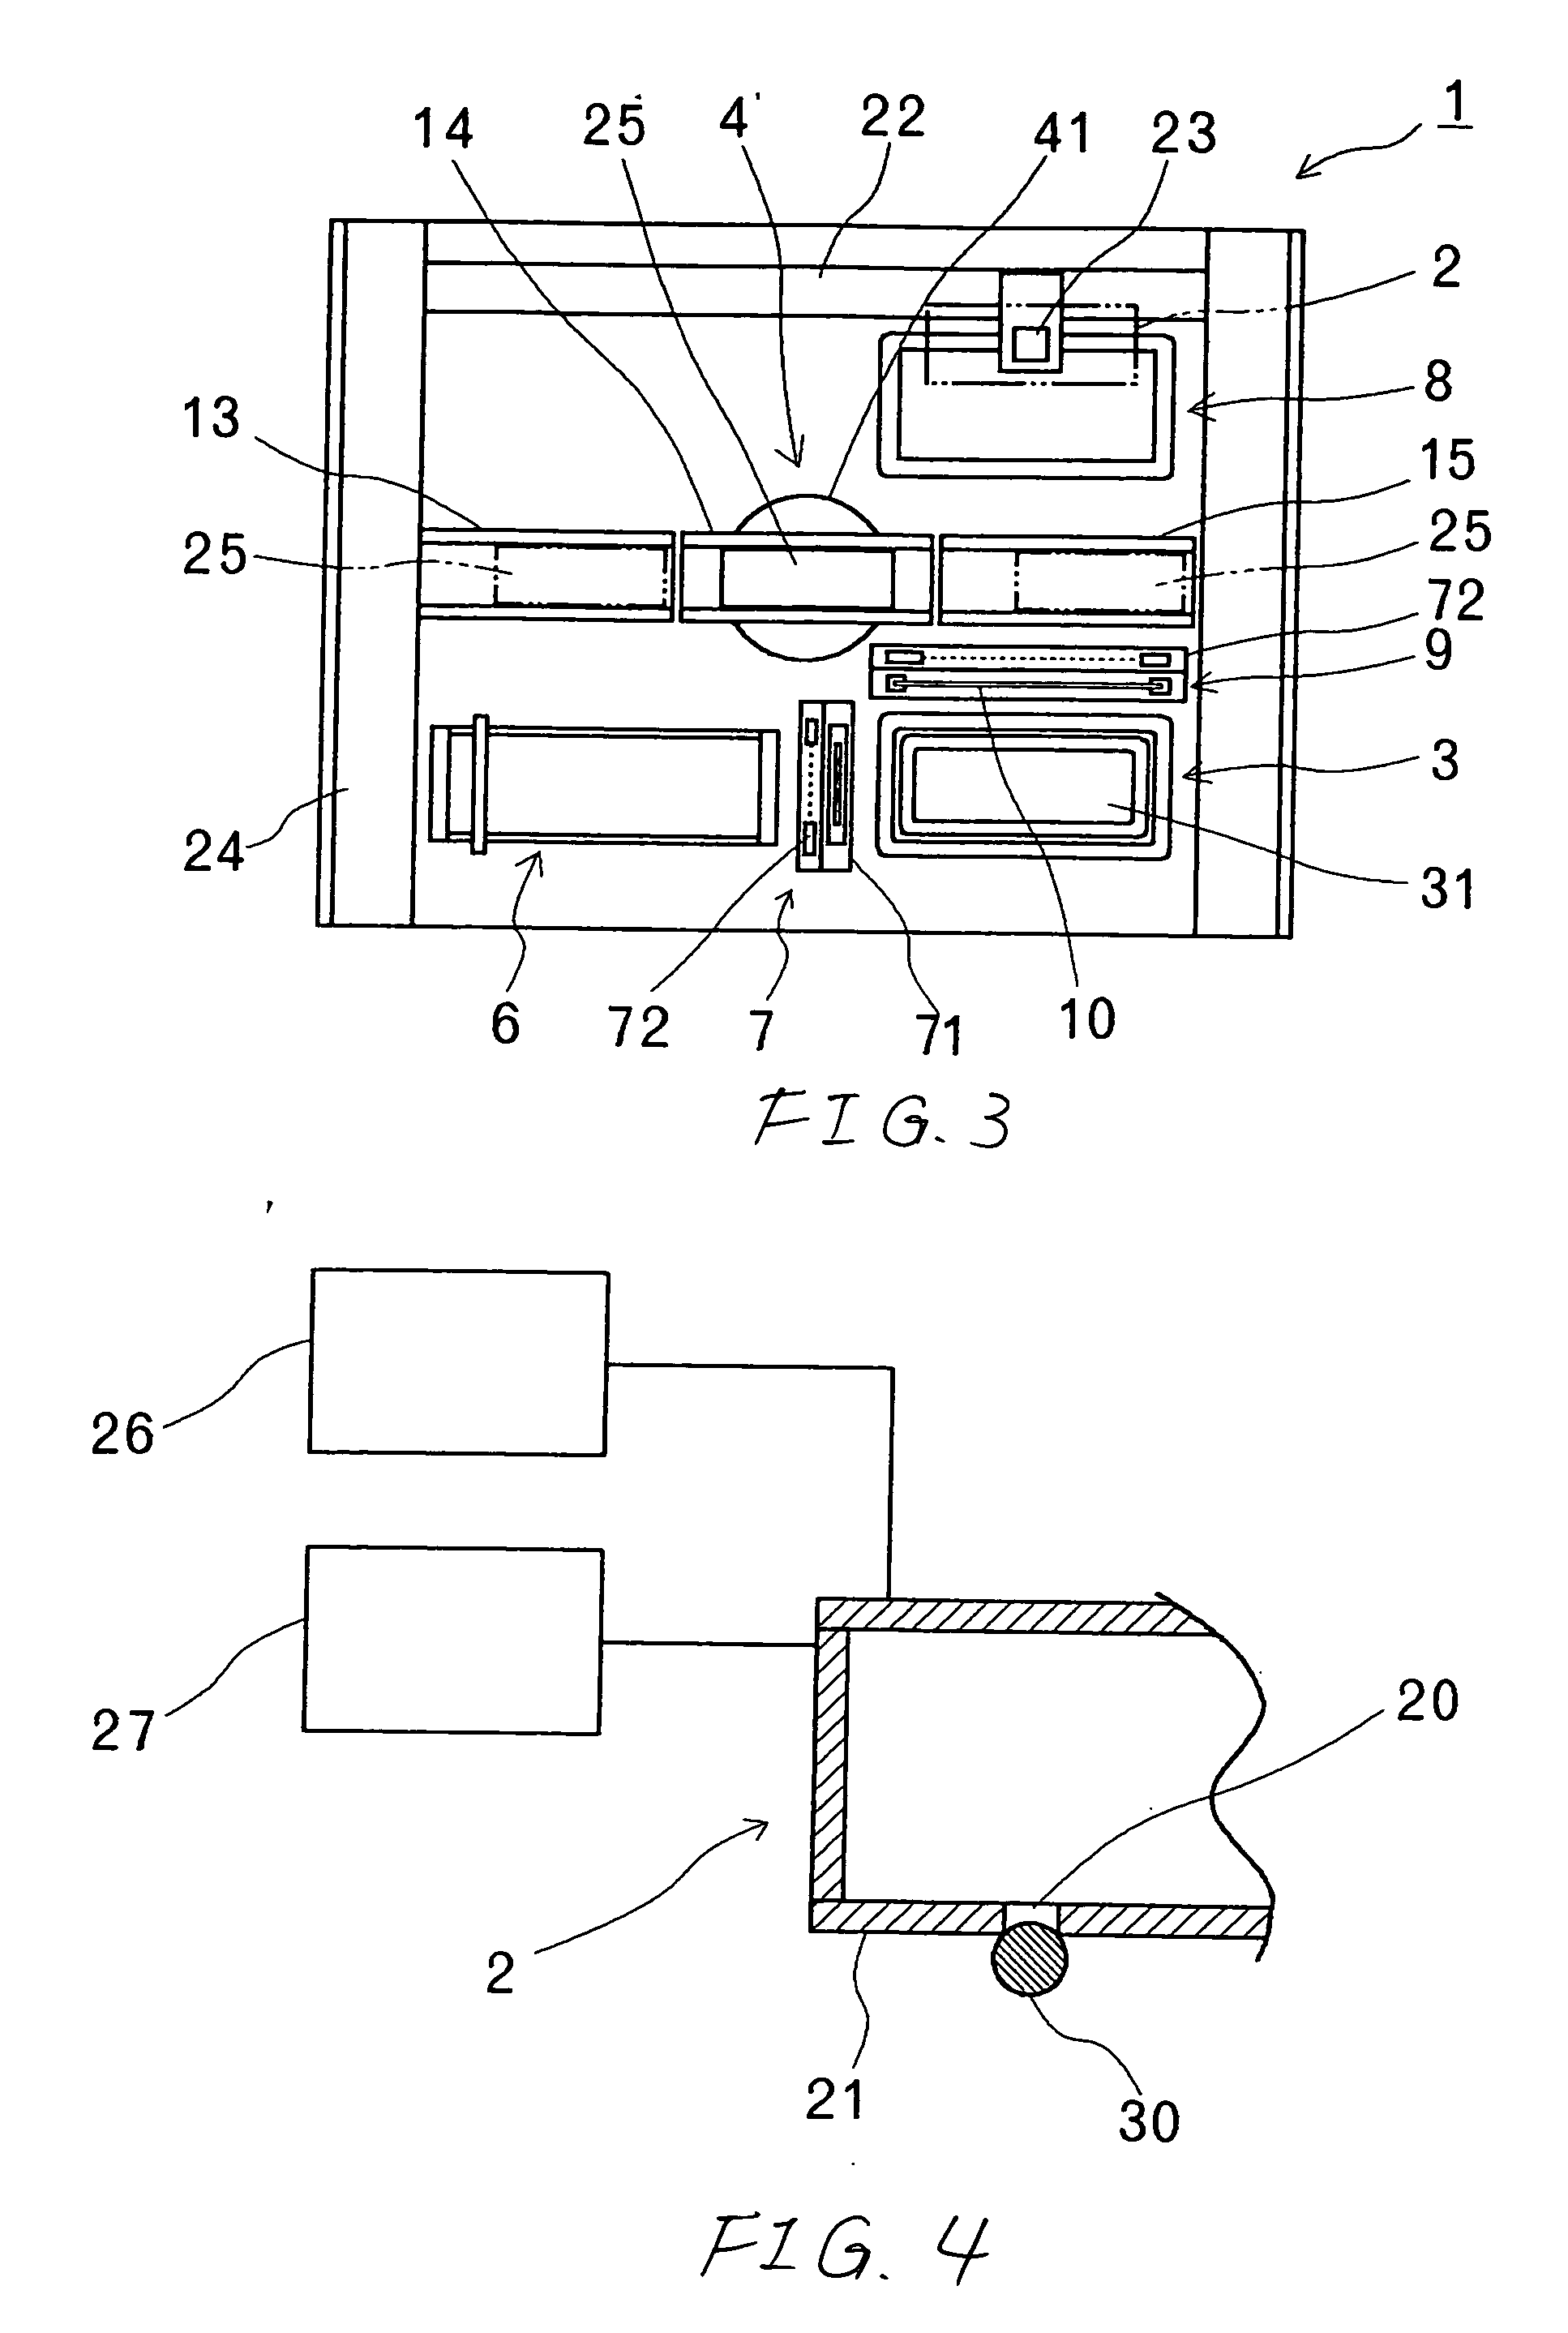 Conductive ball mounting method, and apparatus therefor